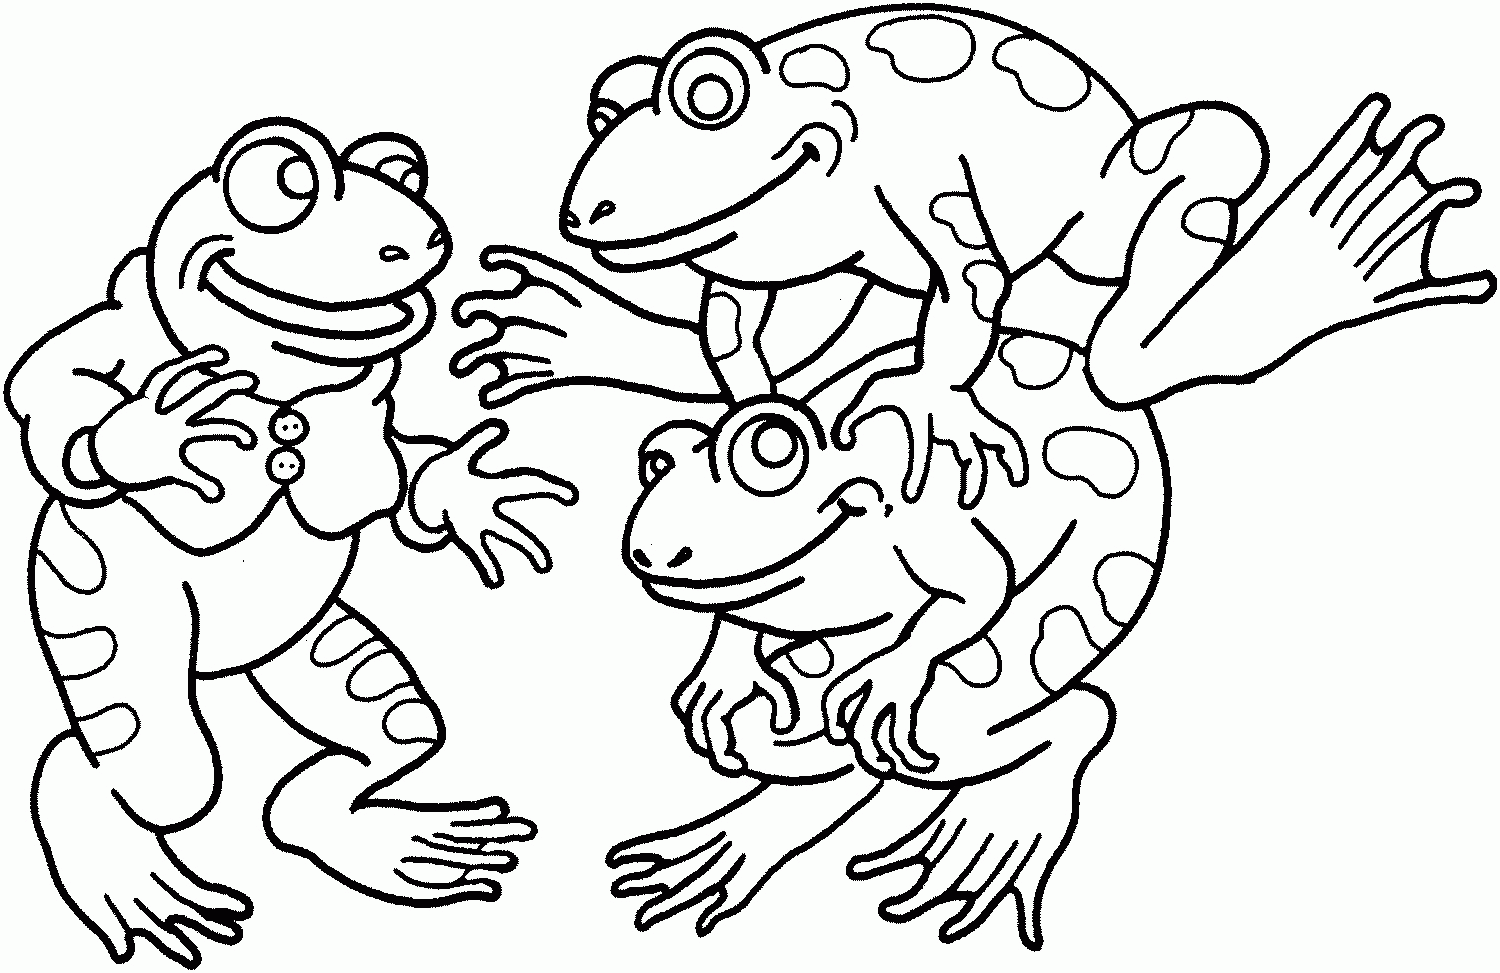 Frog Coloring Pages and Book | UniqueColoringPages